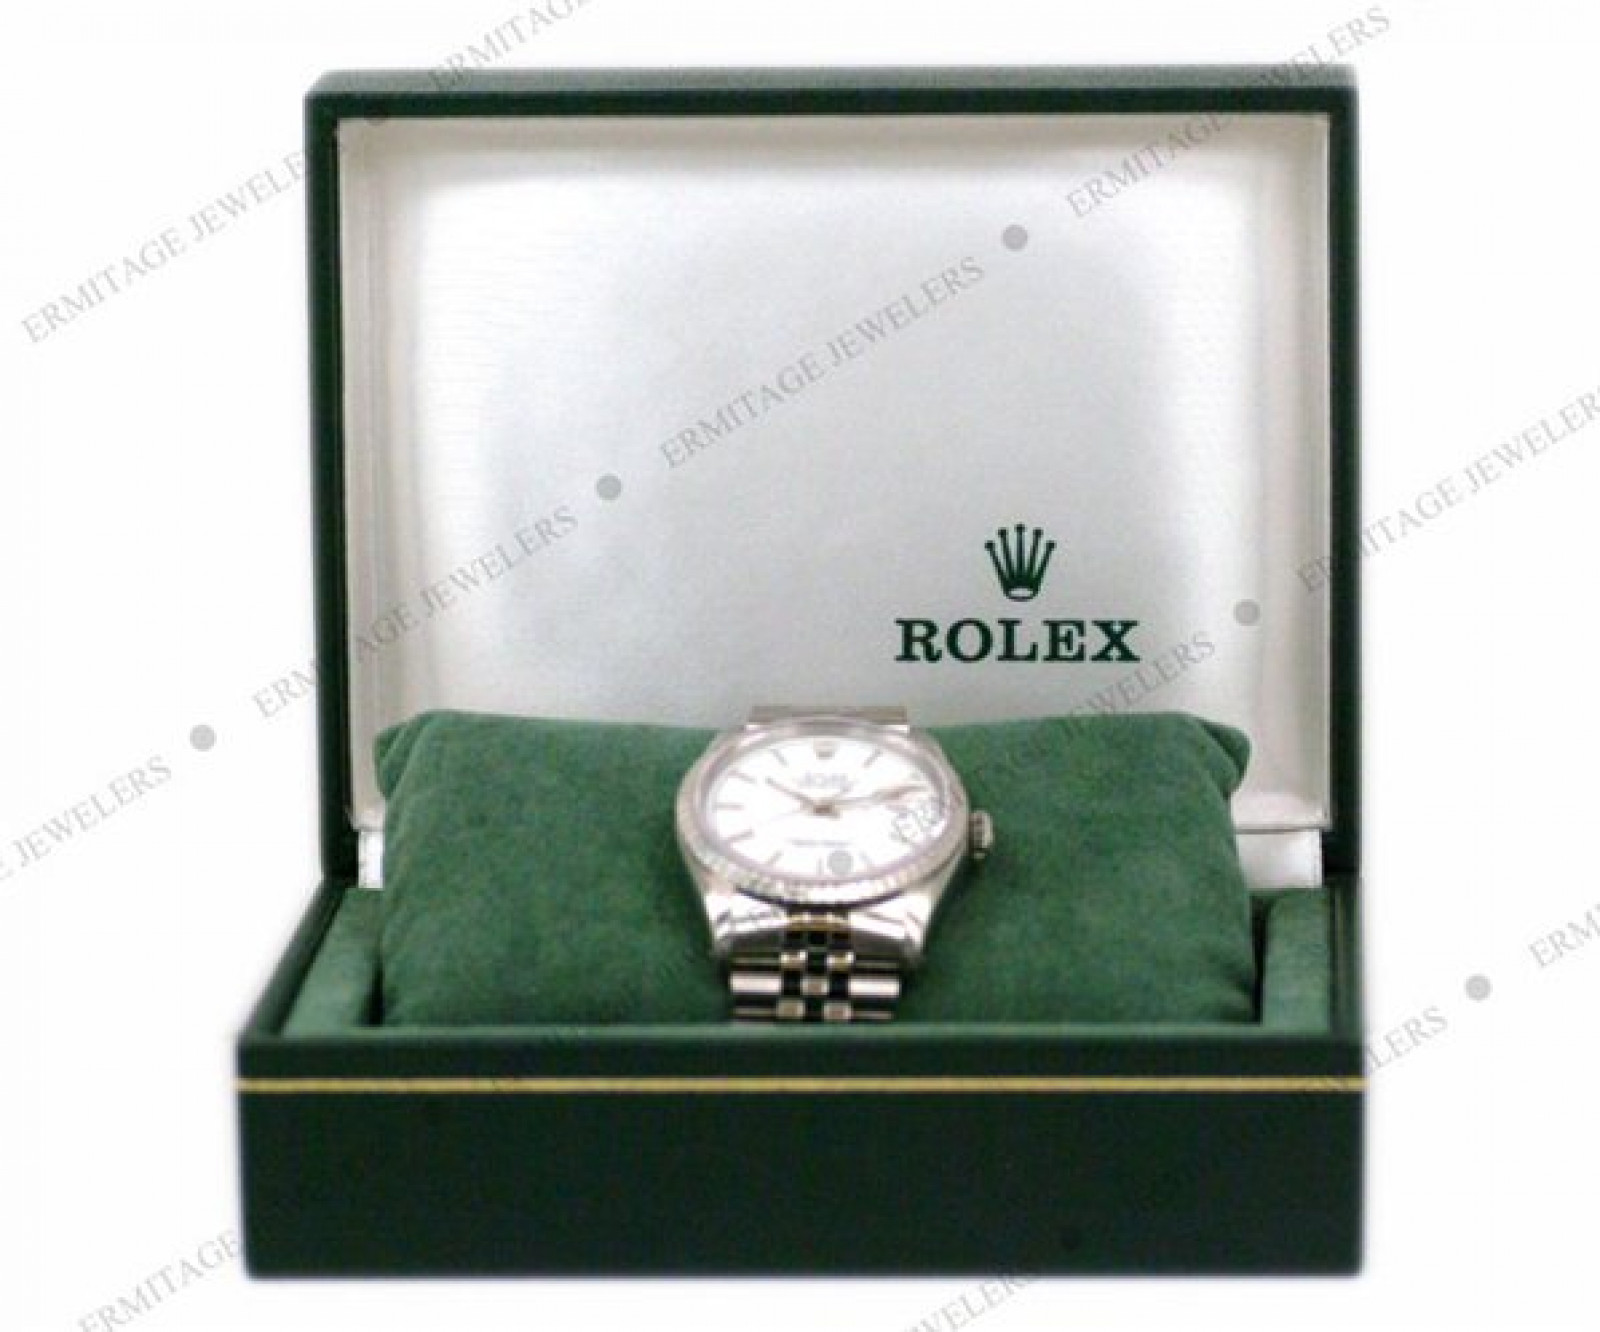 Rolex Datejust 16220 with Stainless Steel